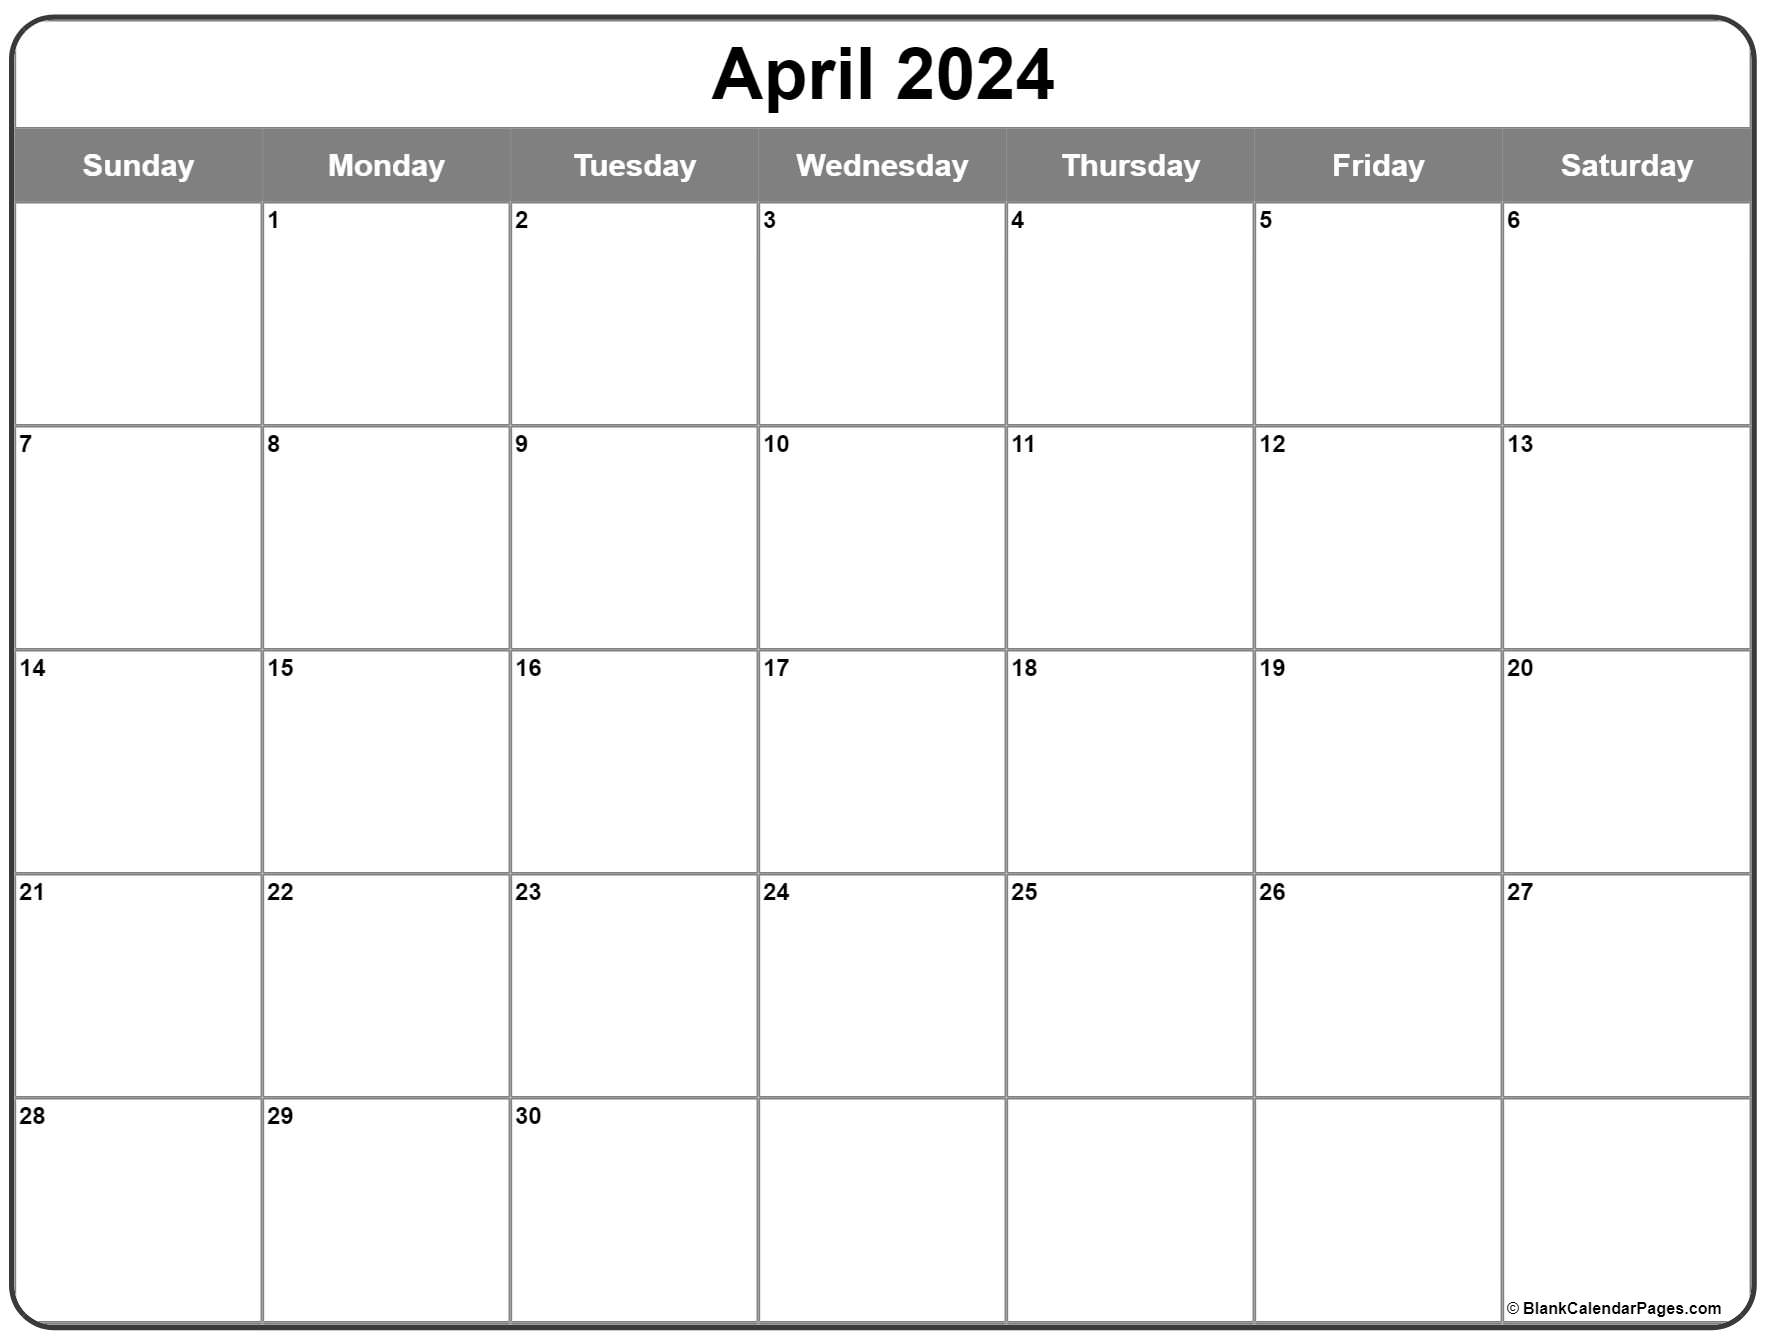 april-calendar-2023-printable-free-get-your-hands-on-amazing-free